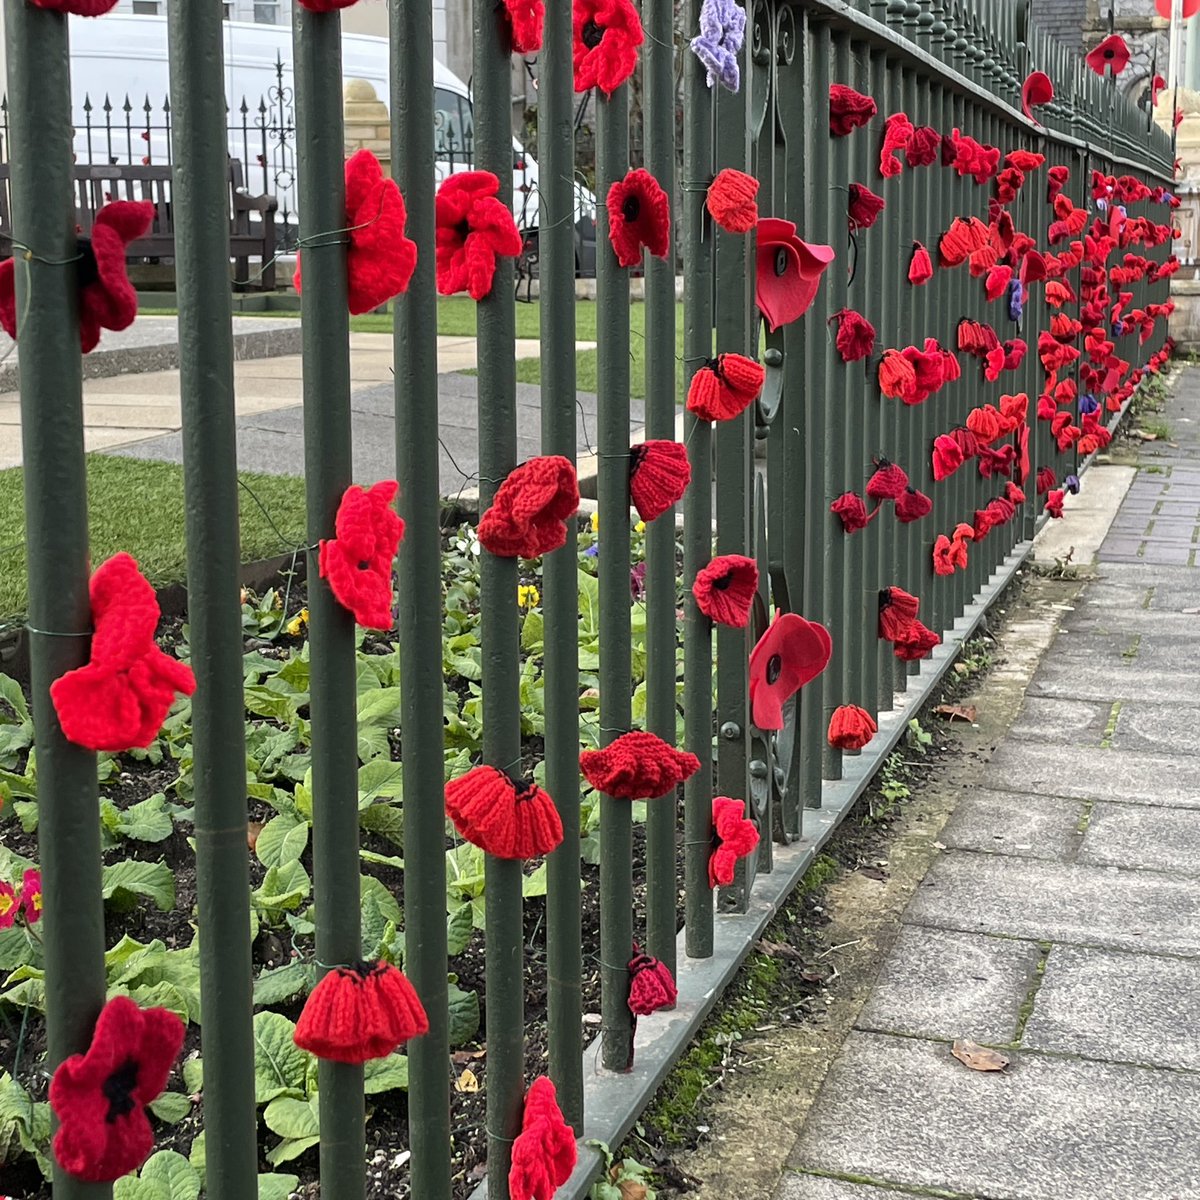 Volunteers from the museum @NewtAbbMuseum the town council and local Royal British Legion @britishlegion 

have decorated the war memorial in Newton Abbot, Devon with 800 hand-knitted poppies 

#FlowersOnFriday #RemembranceDay #newtonabbot #knitting